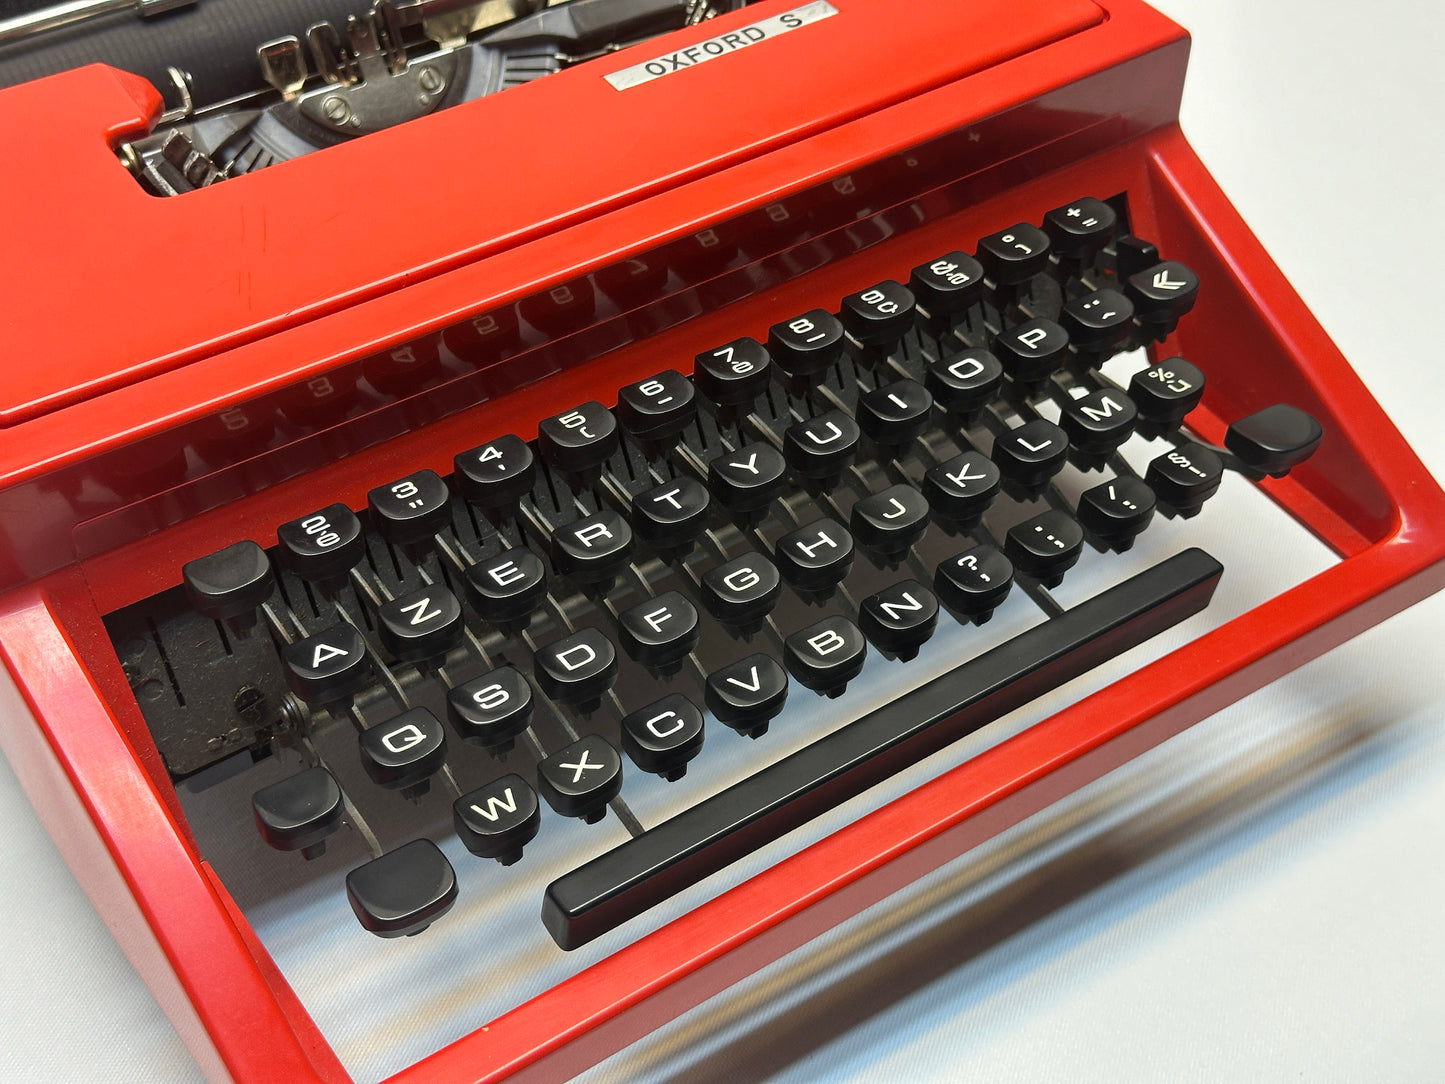 Great gift! Introducing the Oxford's Red Typewriter - 1960 Model: The Ultimate Gift for Writers!